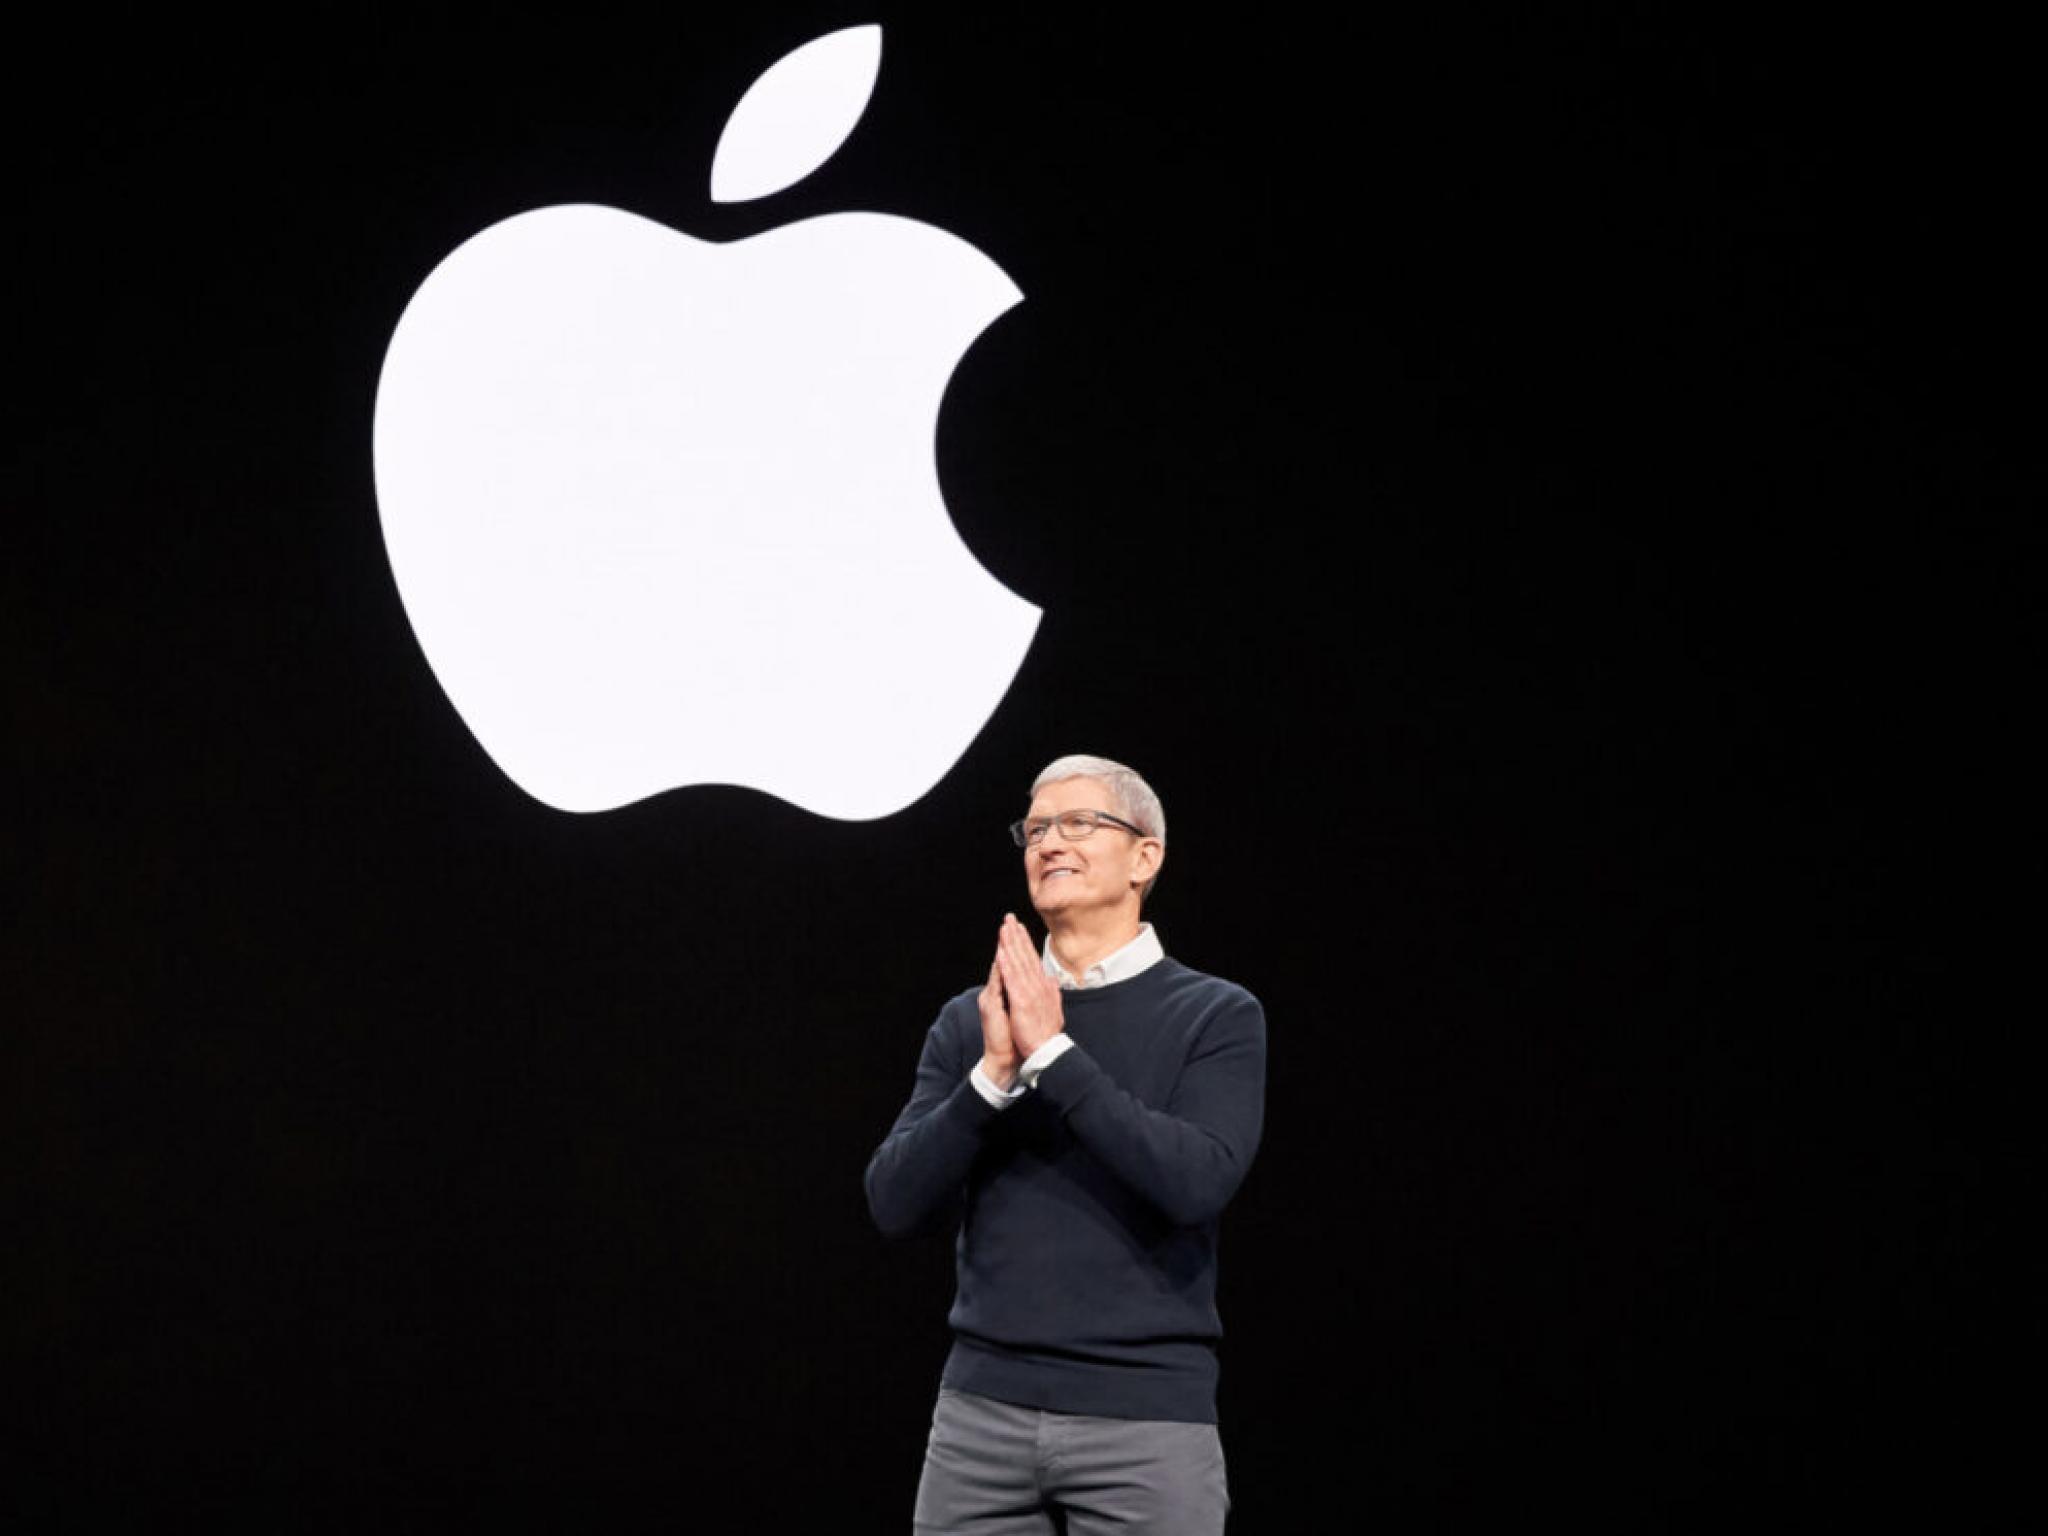  apple-ceo-tim-cook-says-china-is-the-most-competitive-market-in-the-world-as-iphone-sales-take-a-hit 